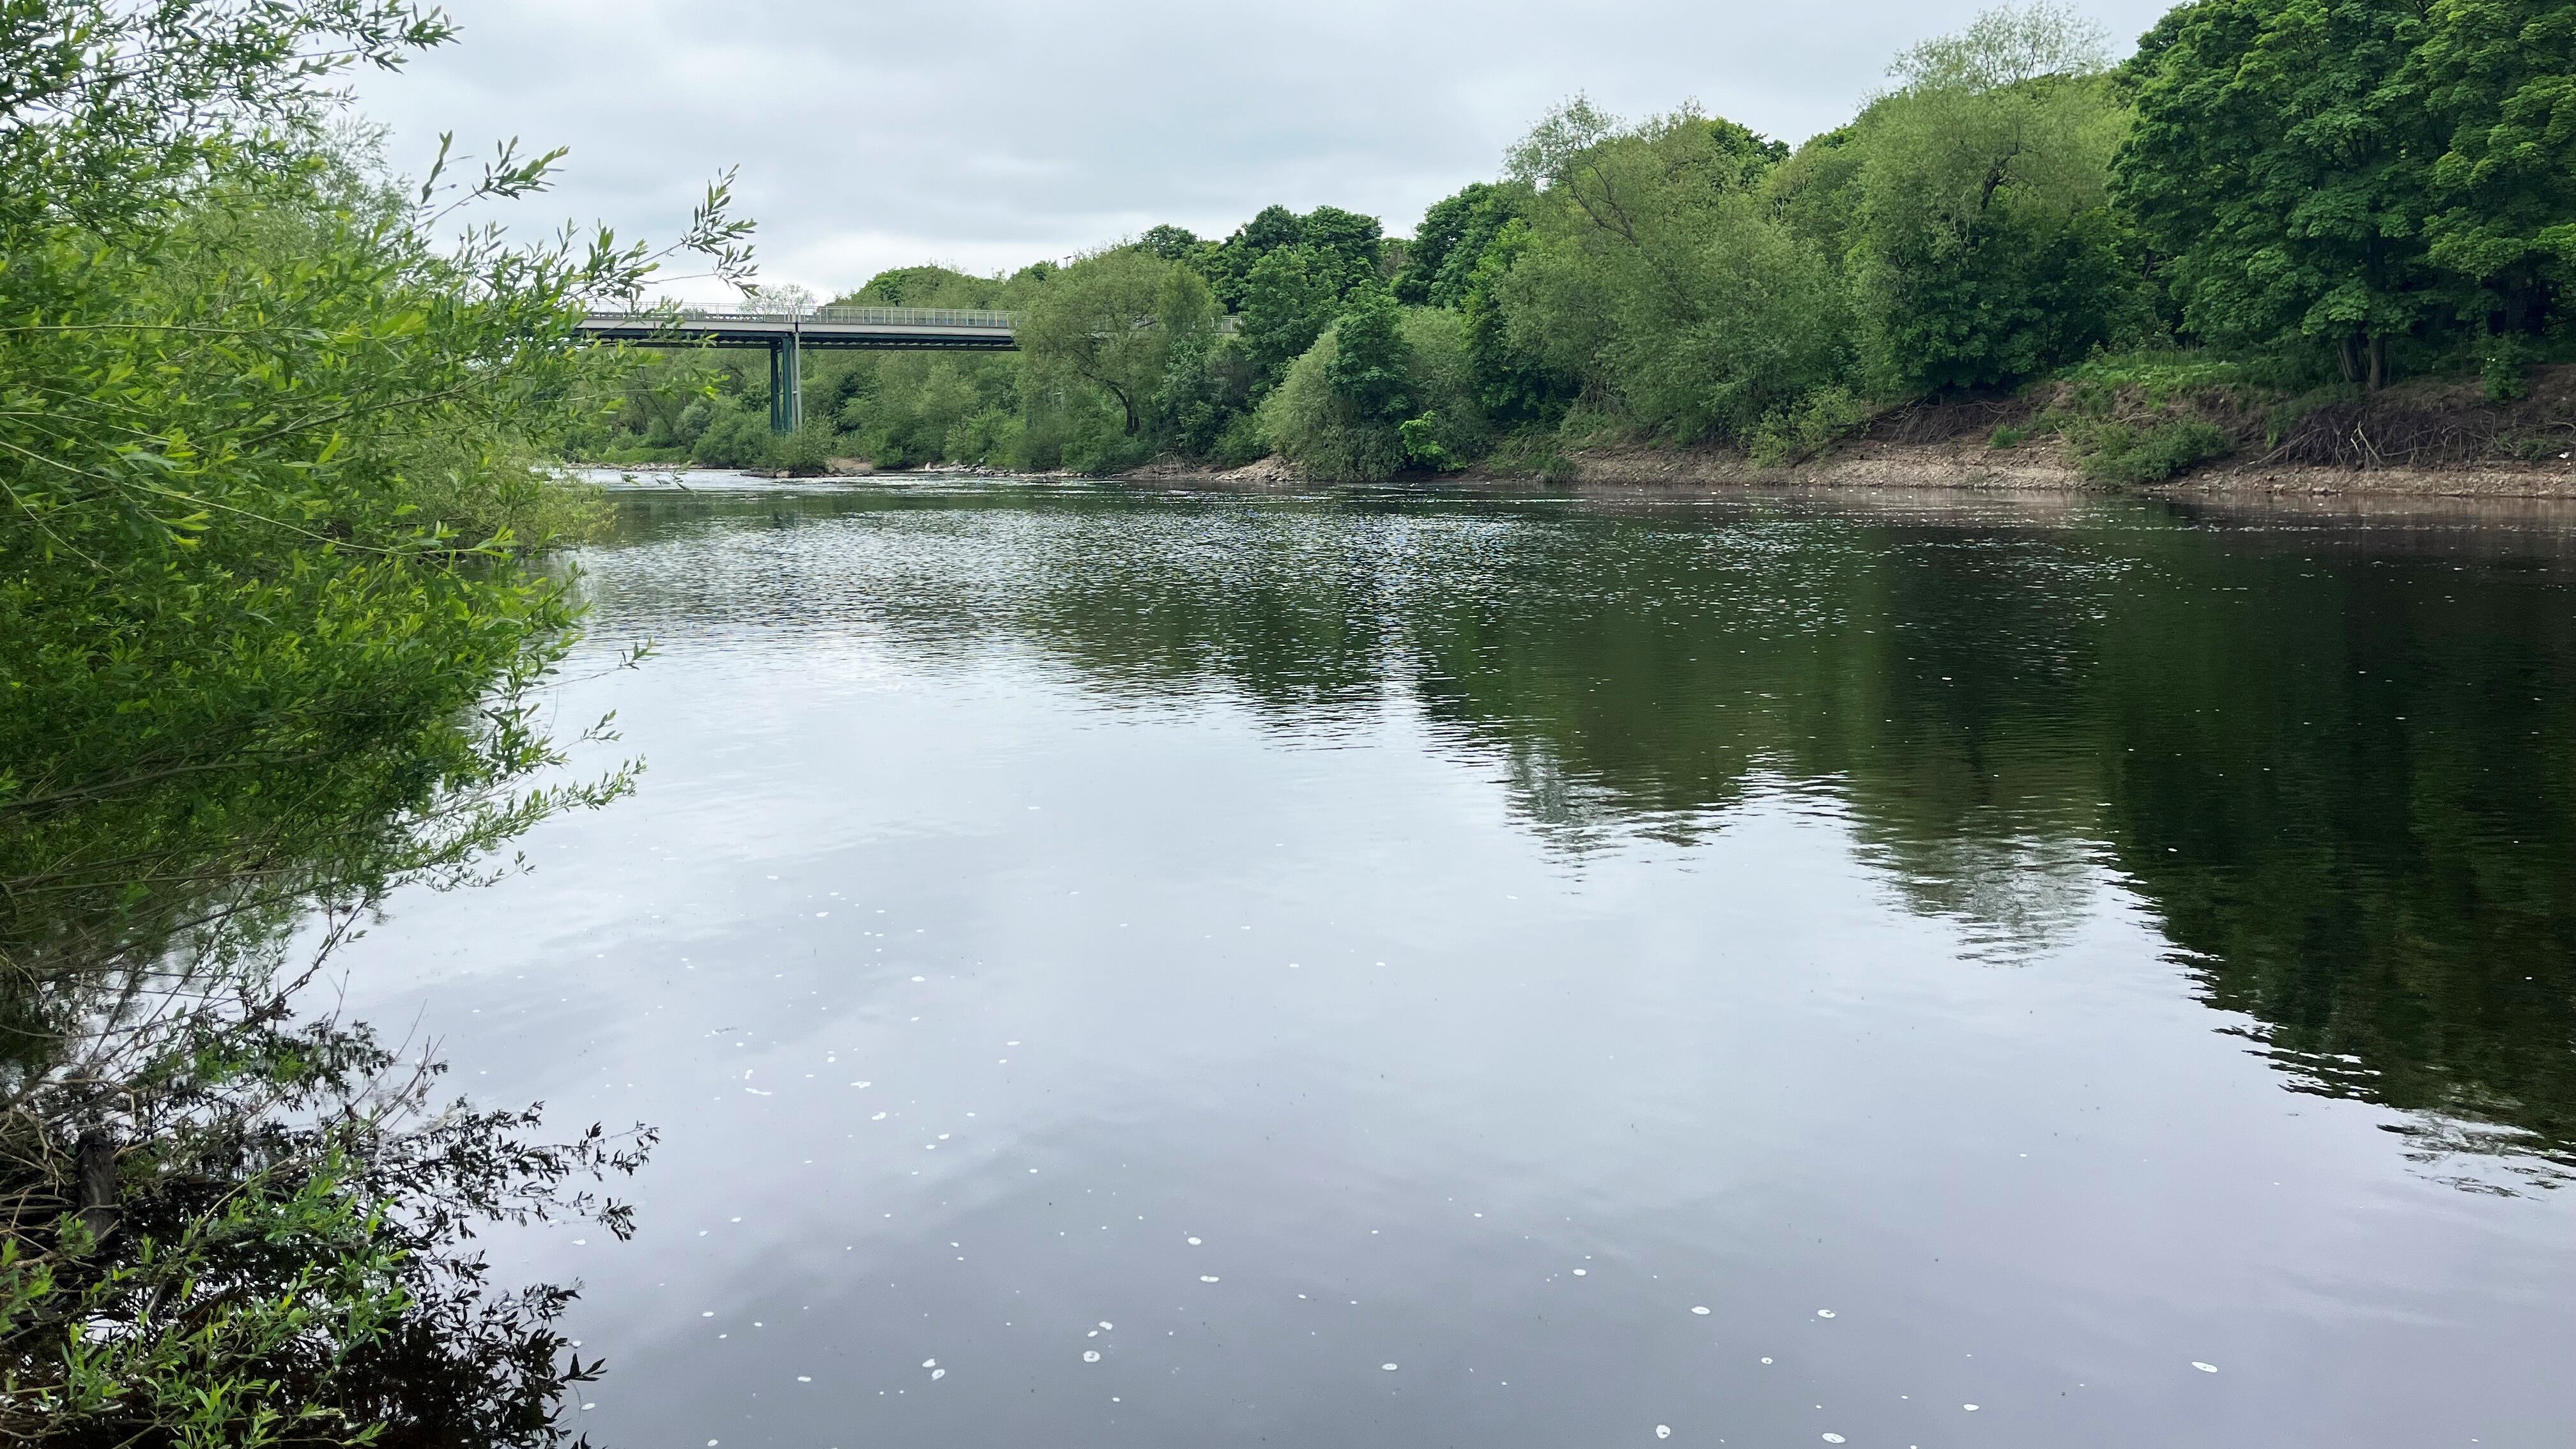 A stretch of the River Tyne at Ovingham, Northumberland